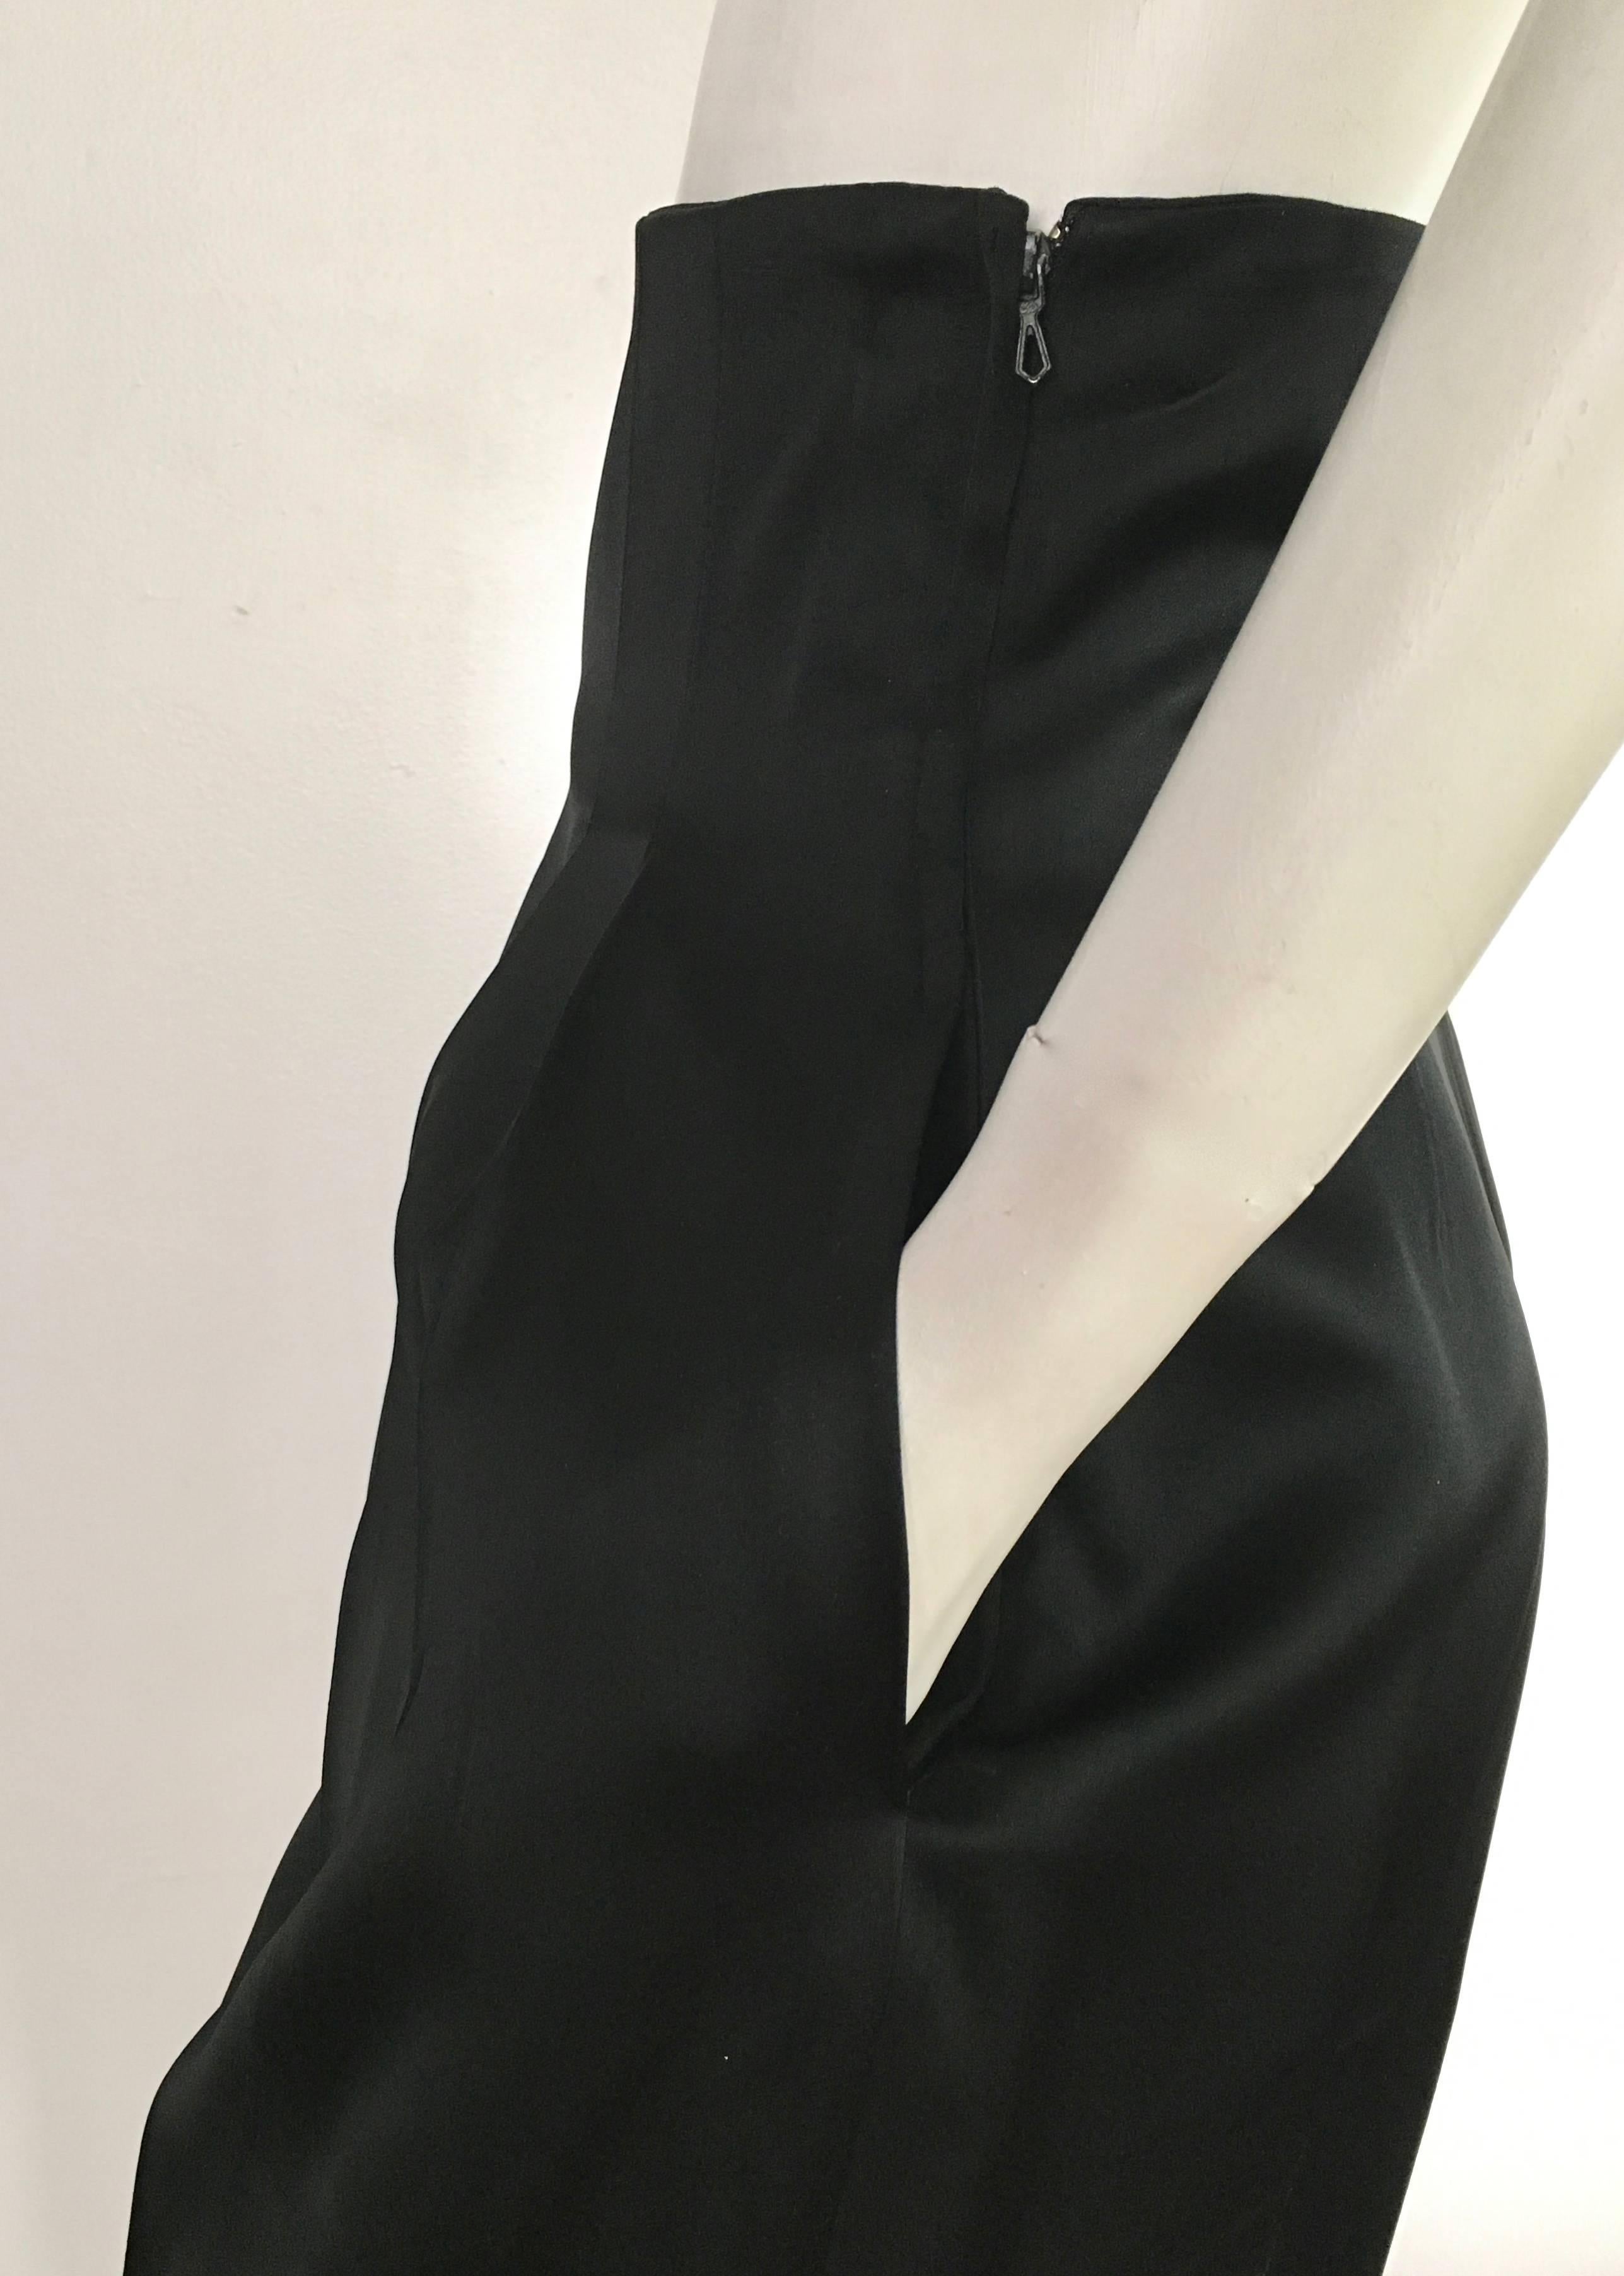 Patrick Kelly 1980s Black High Waisted Evening Pants with Pockets Size 4/6. 2